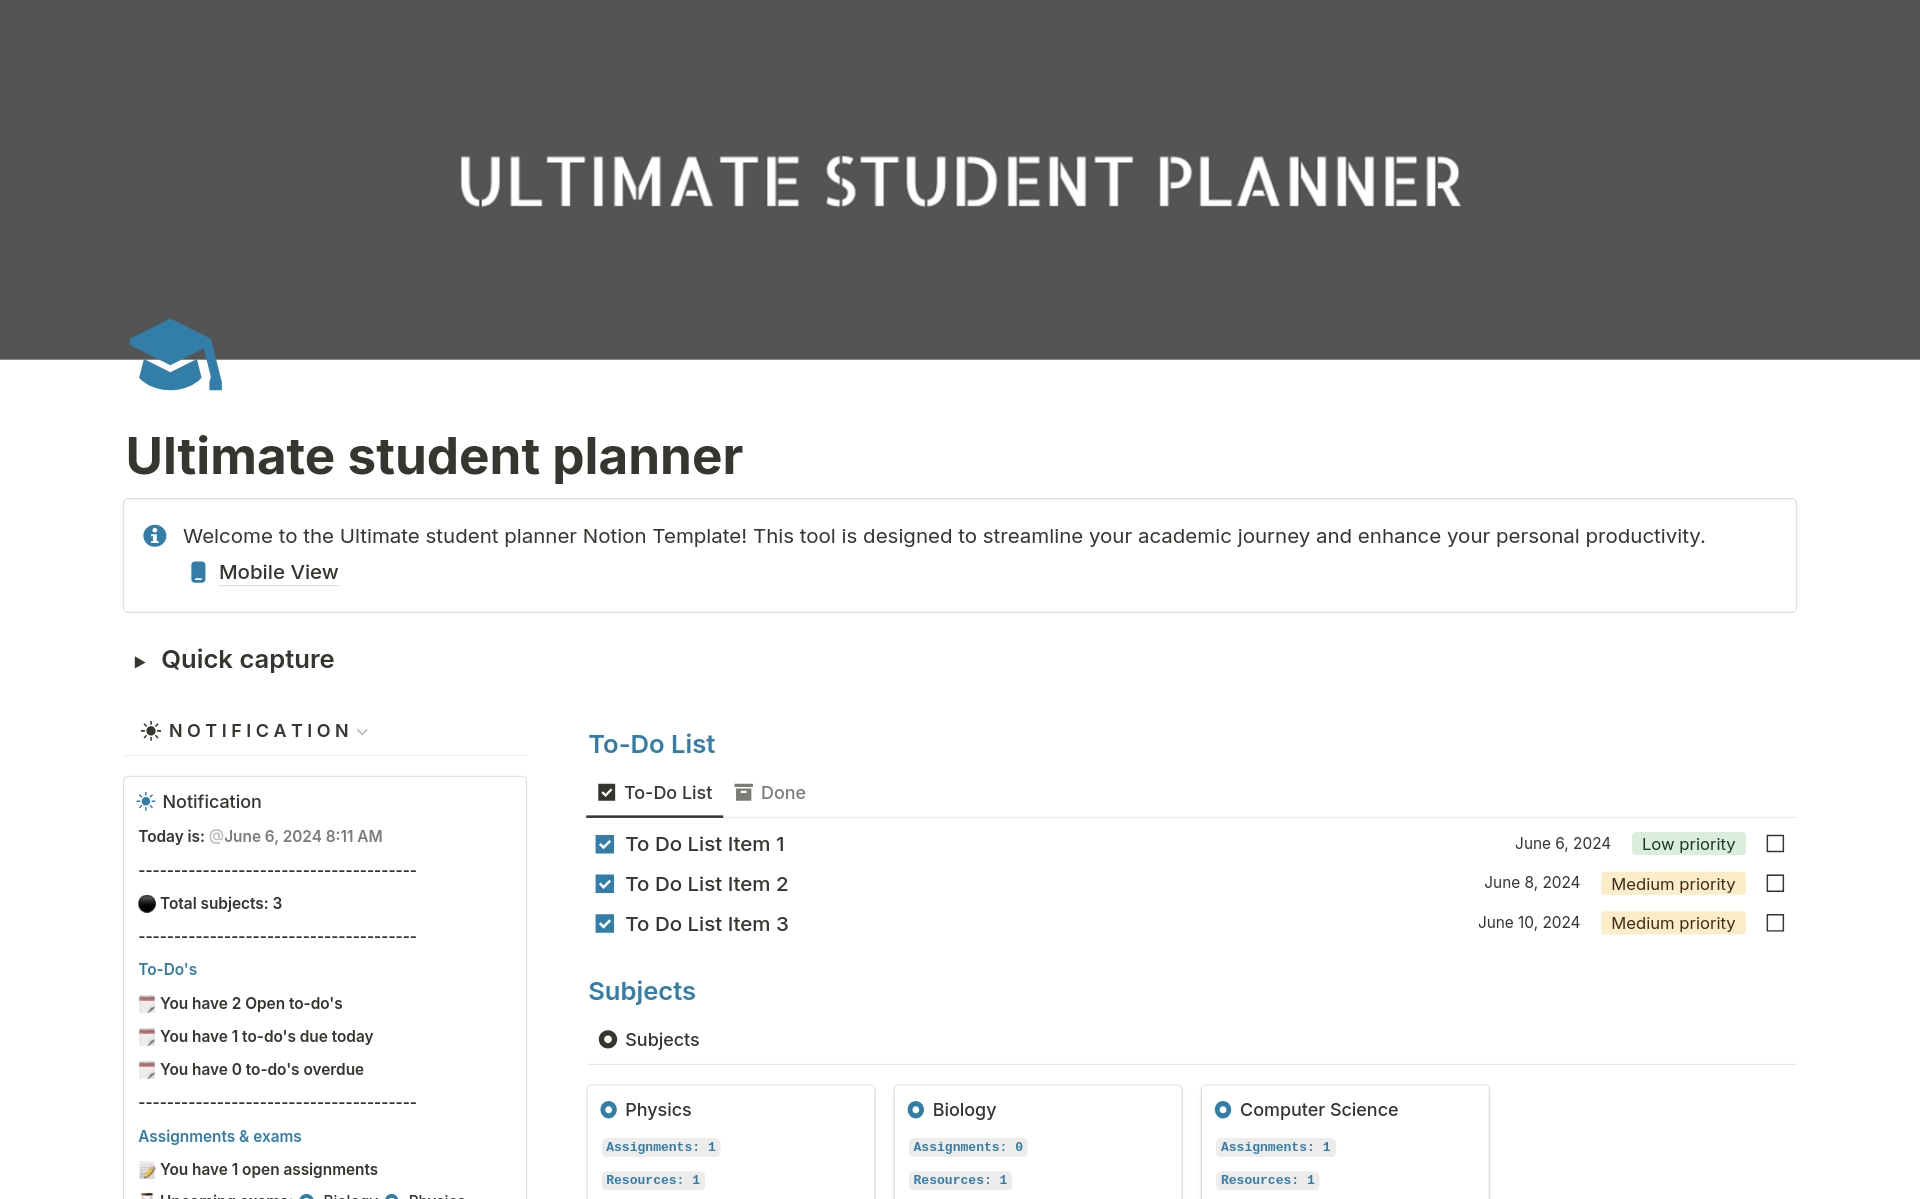 Welcome to the Ultimate student planner Notion Template! This tool is designed to streamline your academic journey and enhance your personal productivity. 